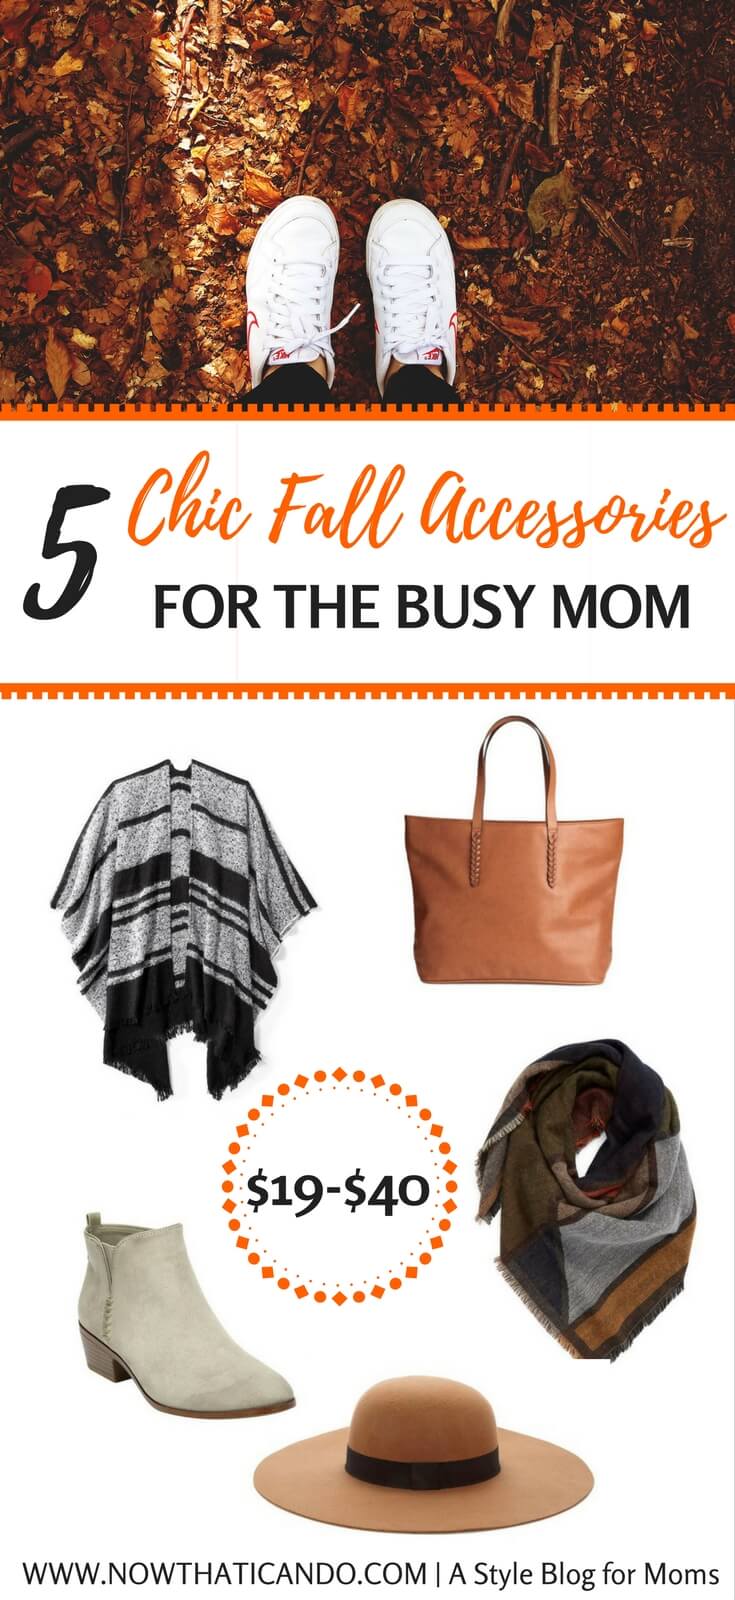 Fall into effortless mom style with these affordable accessories. Just one or two added to your current wardrobe can make your mom outfits extra stylish. Click through to see these affordable picks.